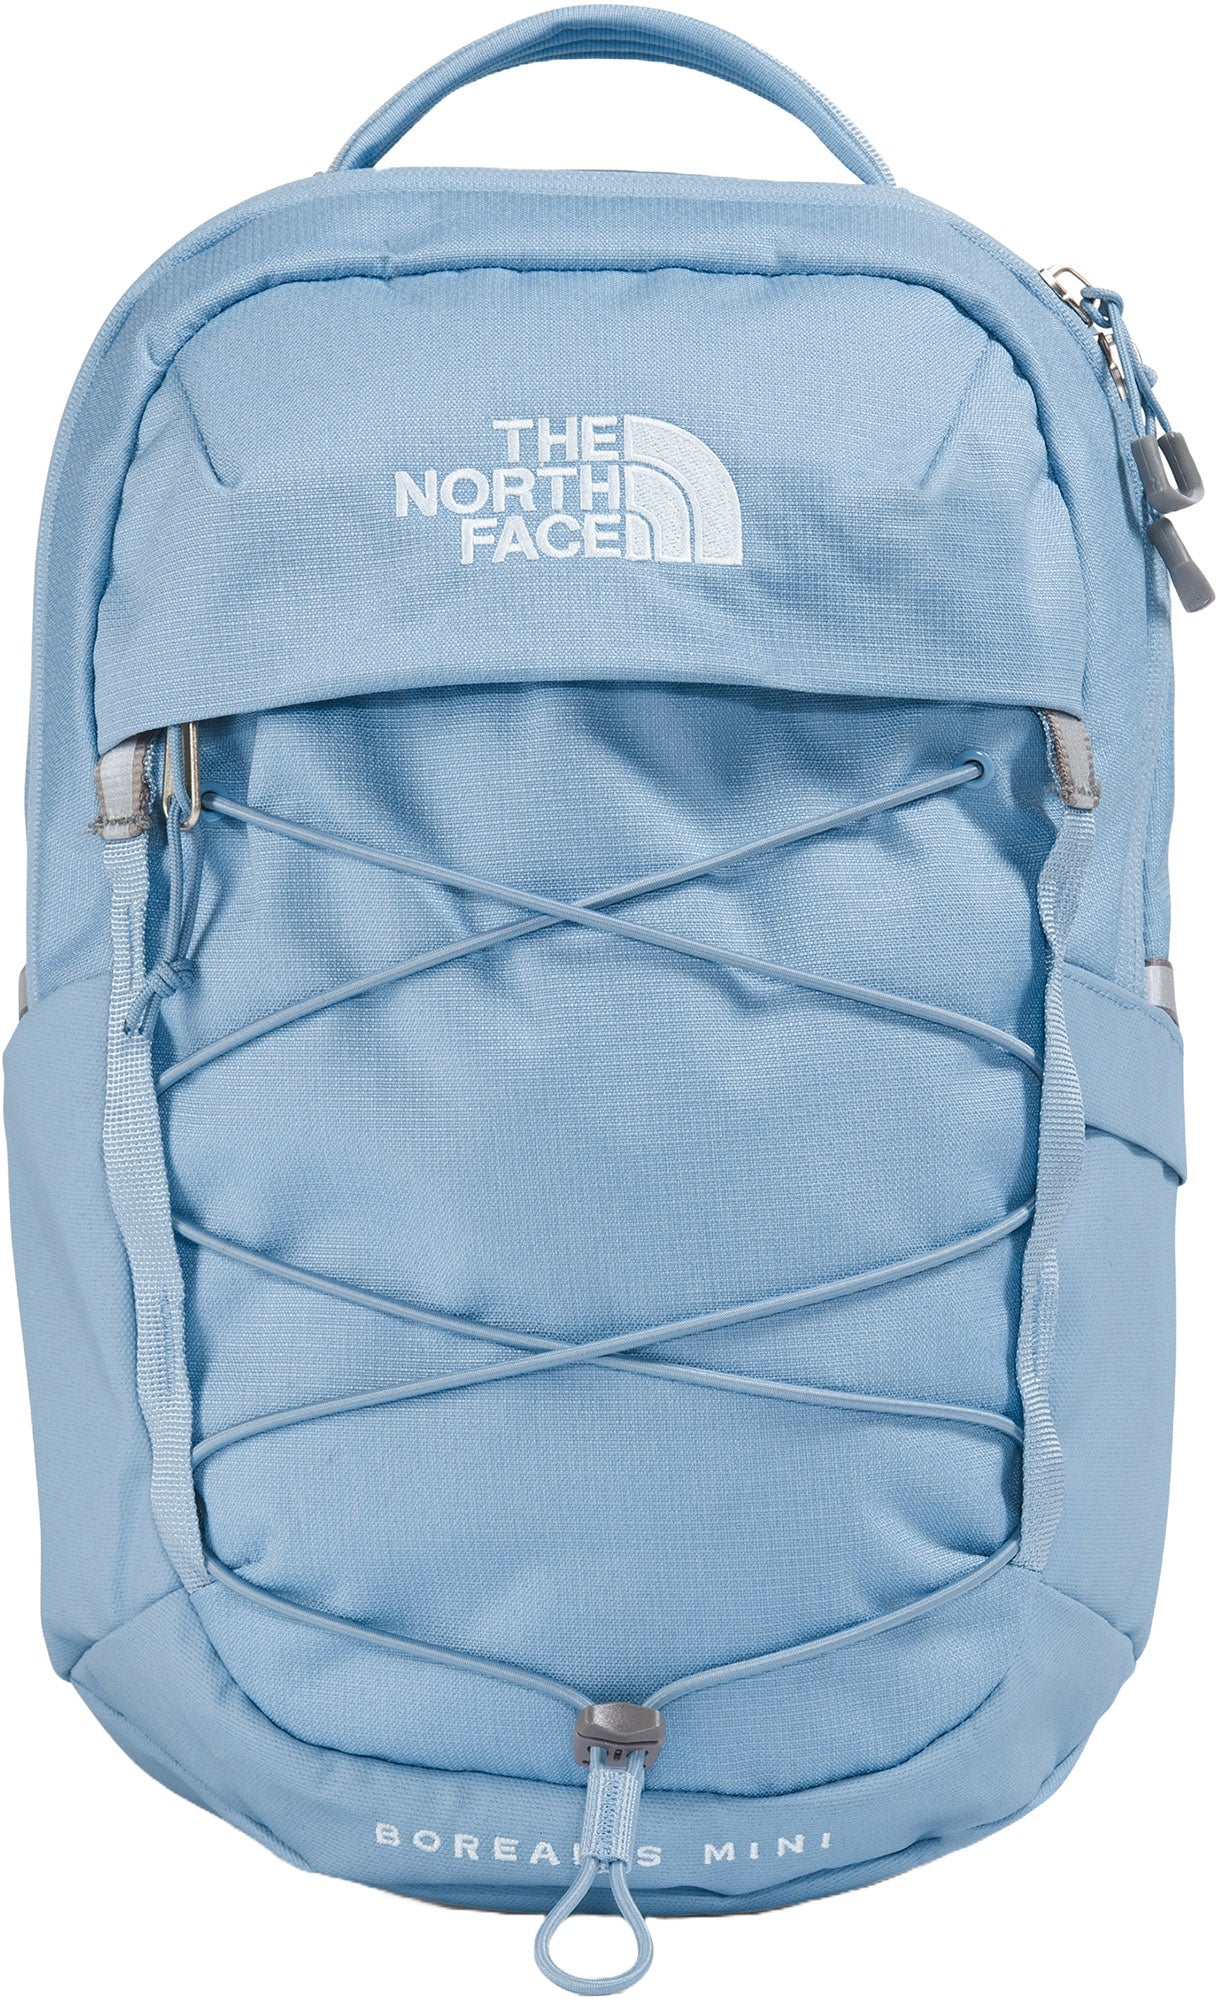 The North Face Borealis Mini Backpack 10L OS Steel Blue Dark Heather